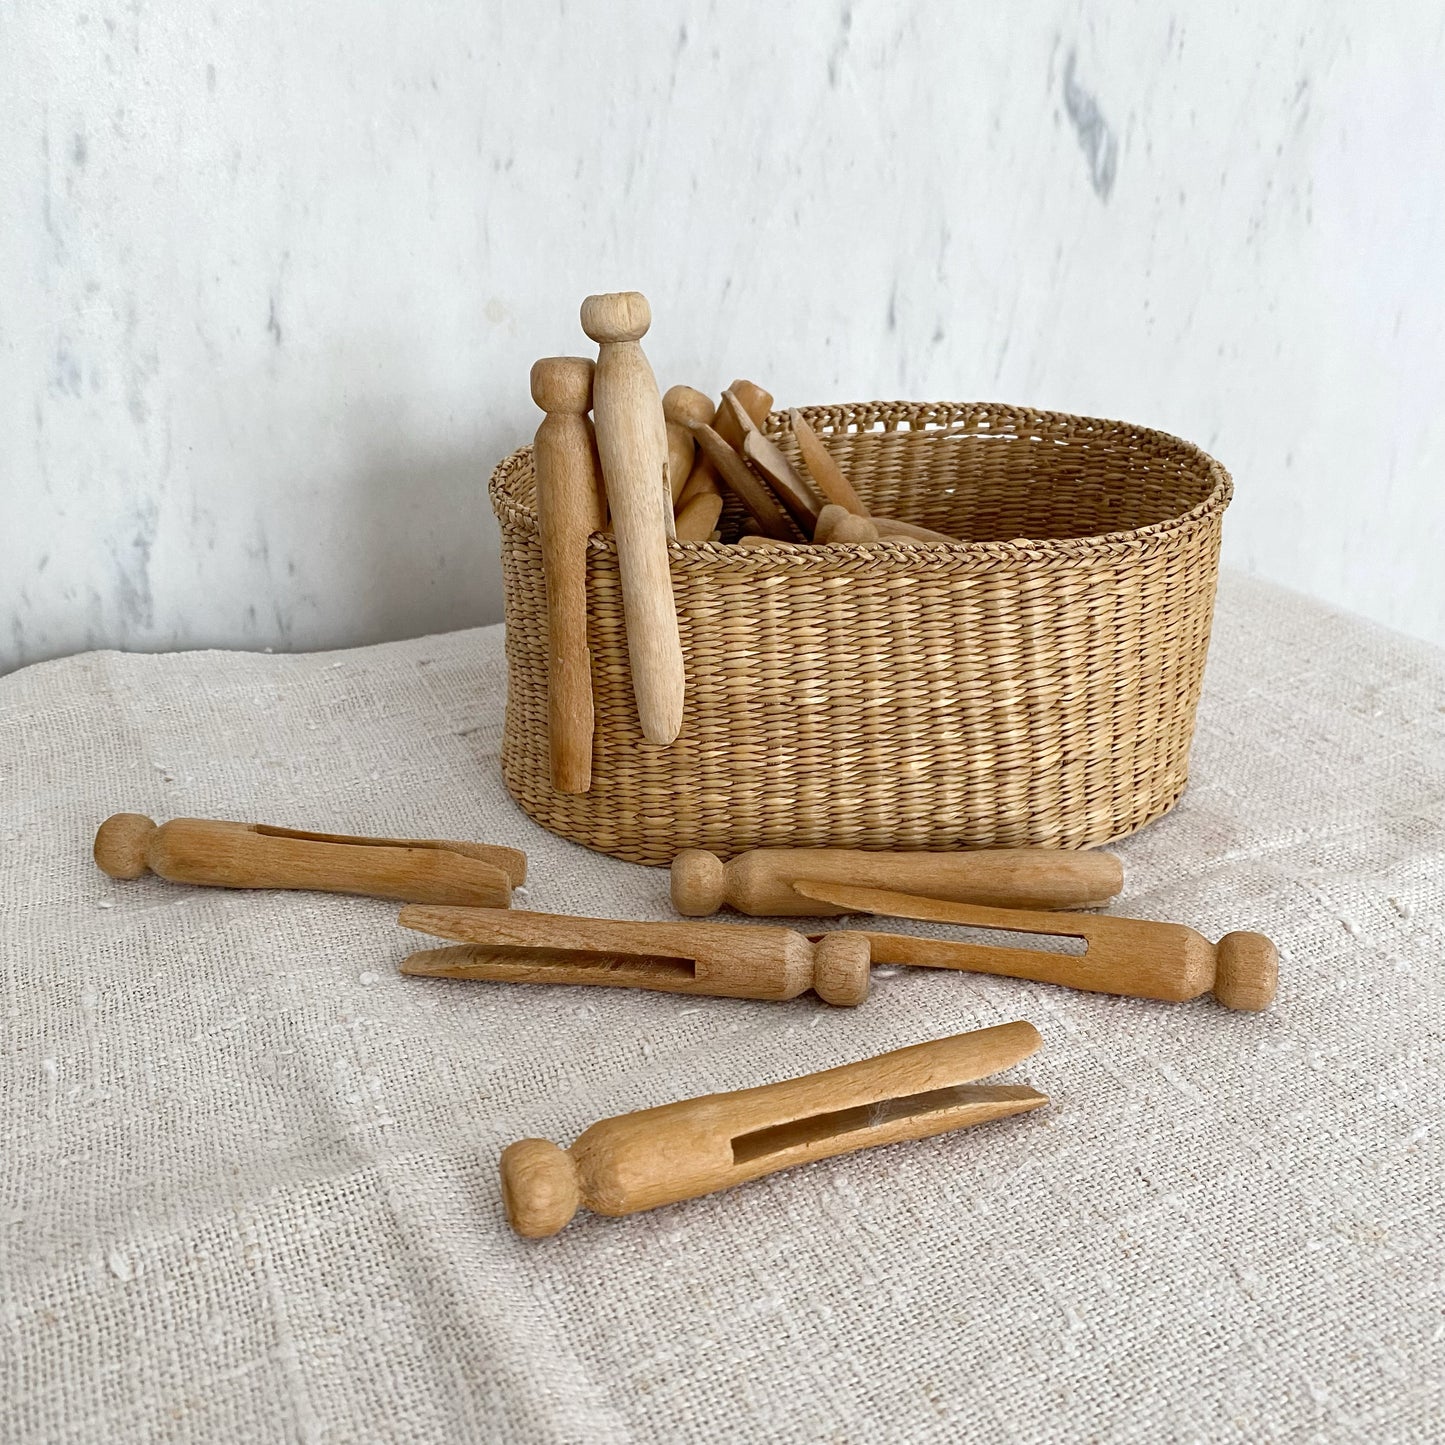 Collection of Vintage Wood Clothespins in Basket